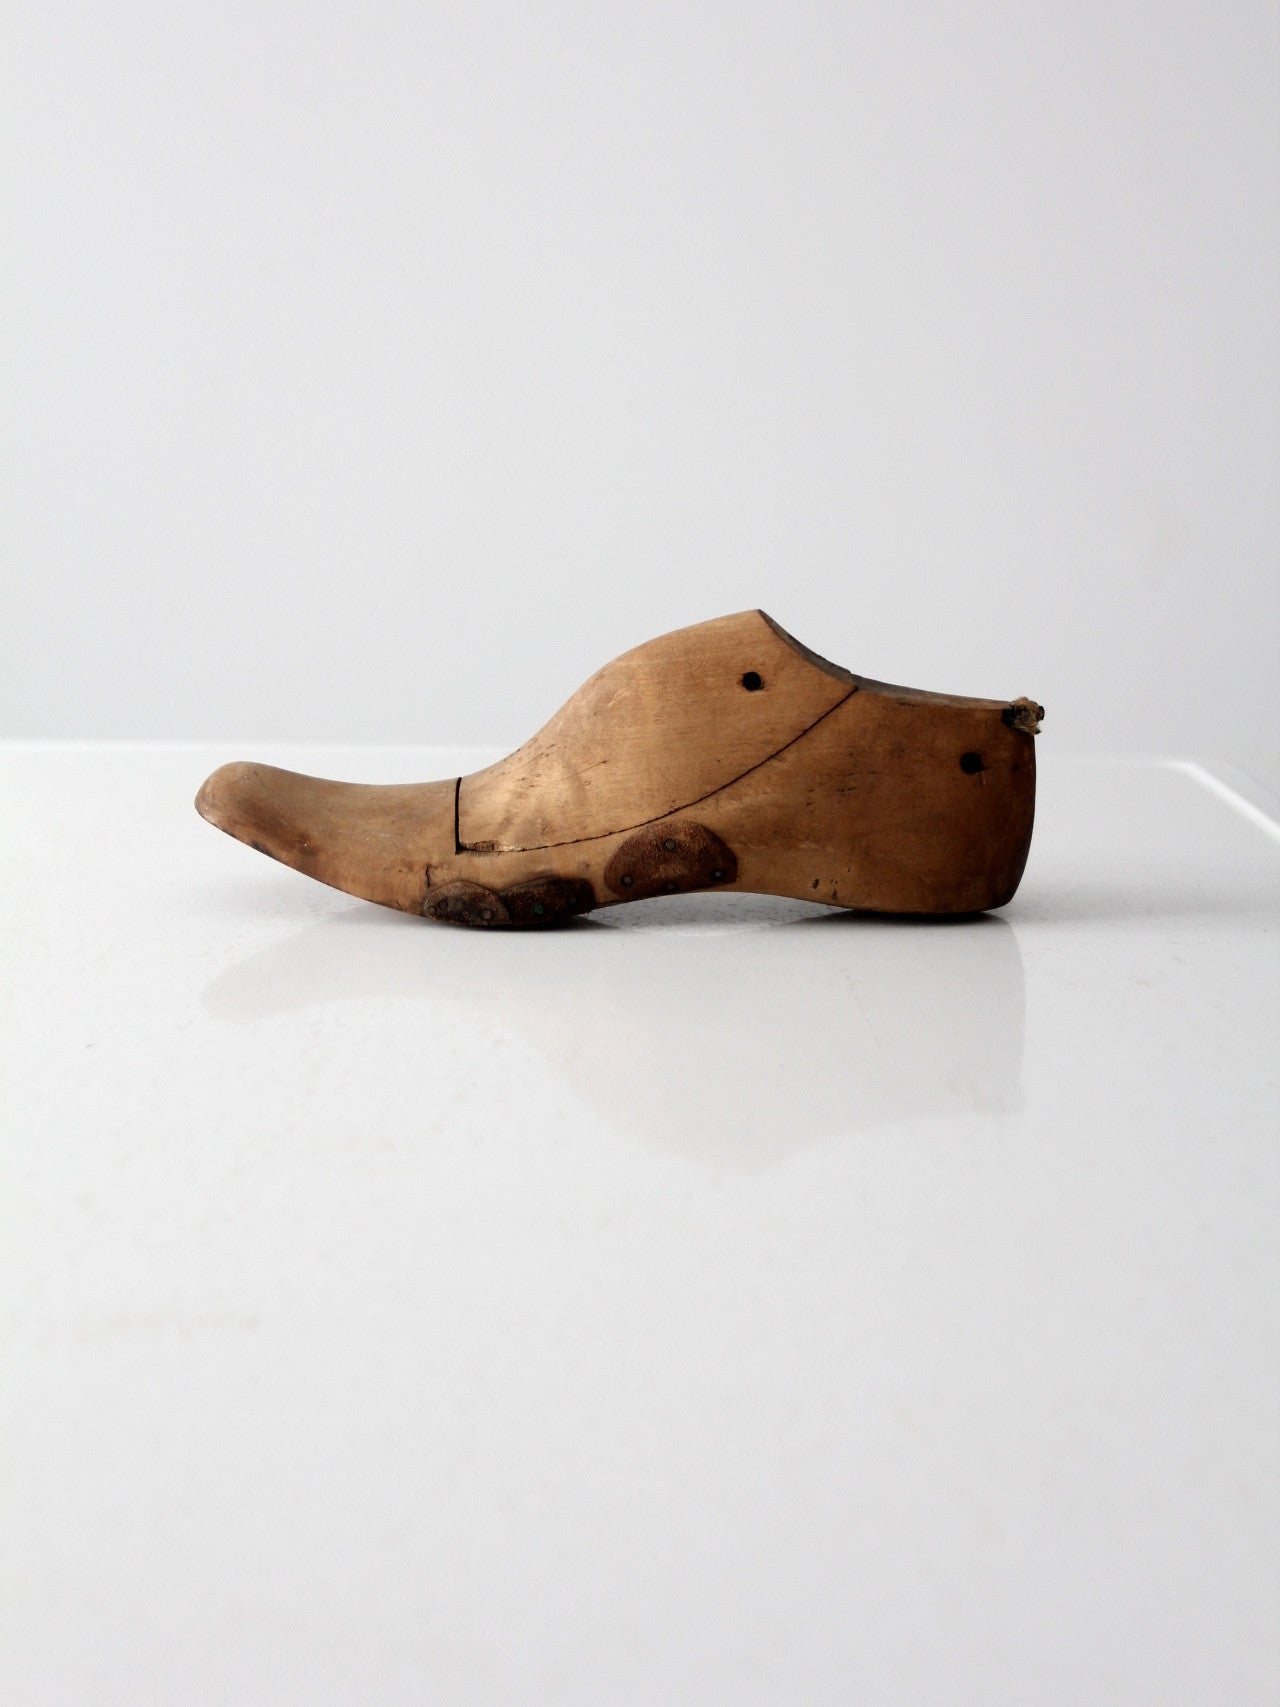 antique cobbler's shoe form with leather patching